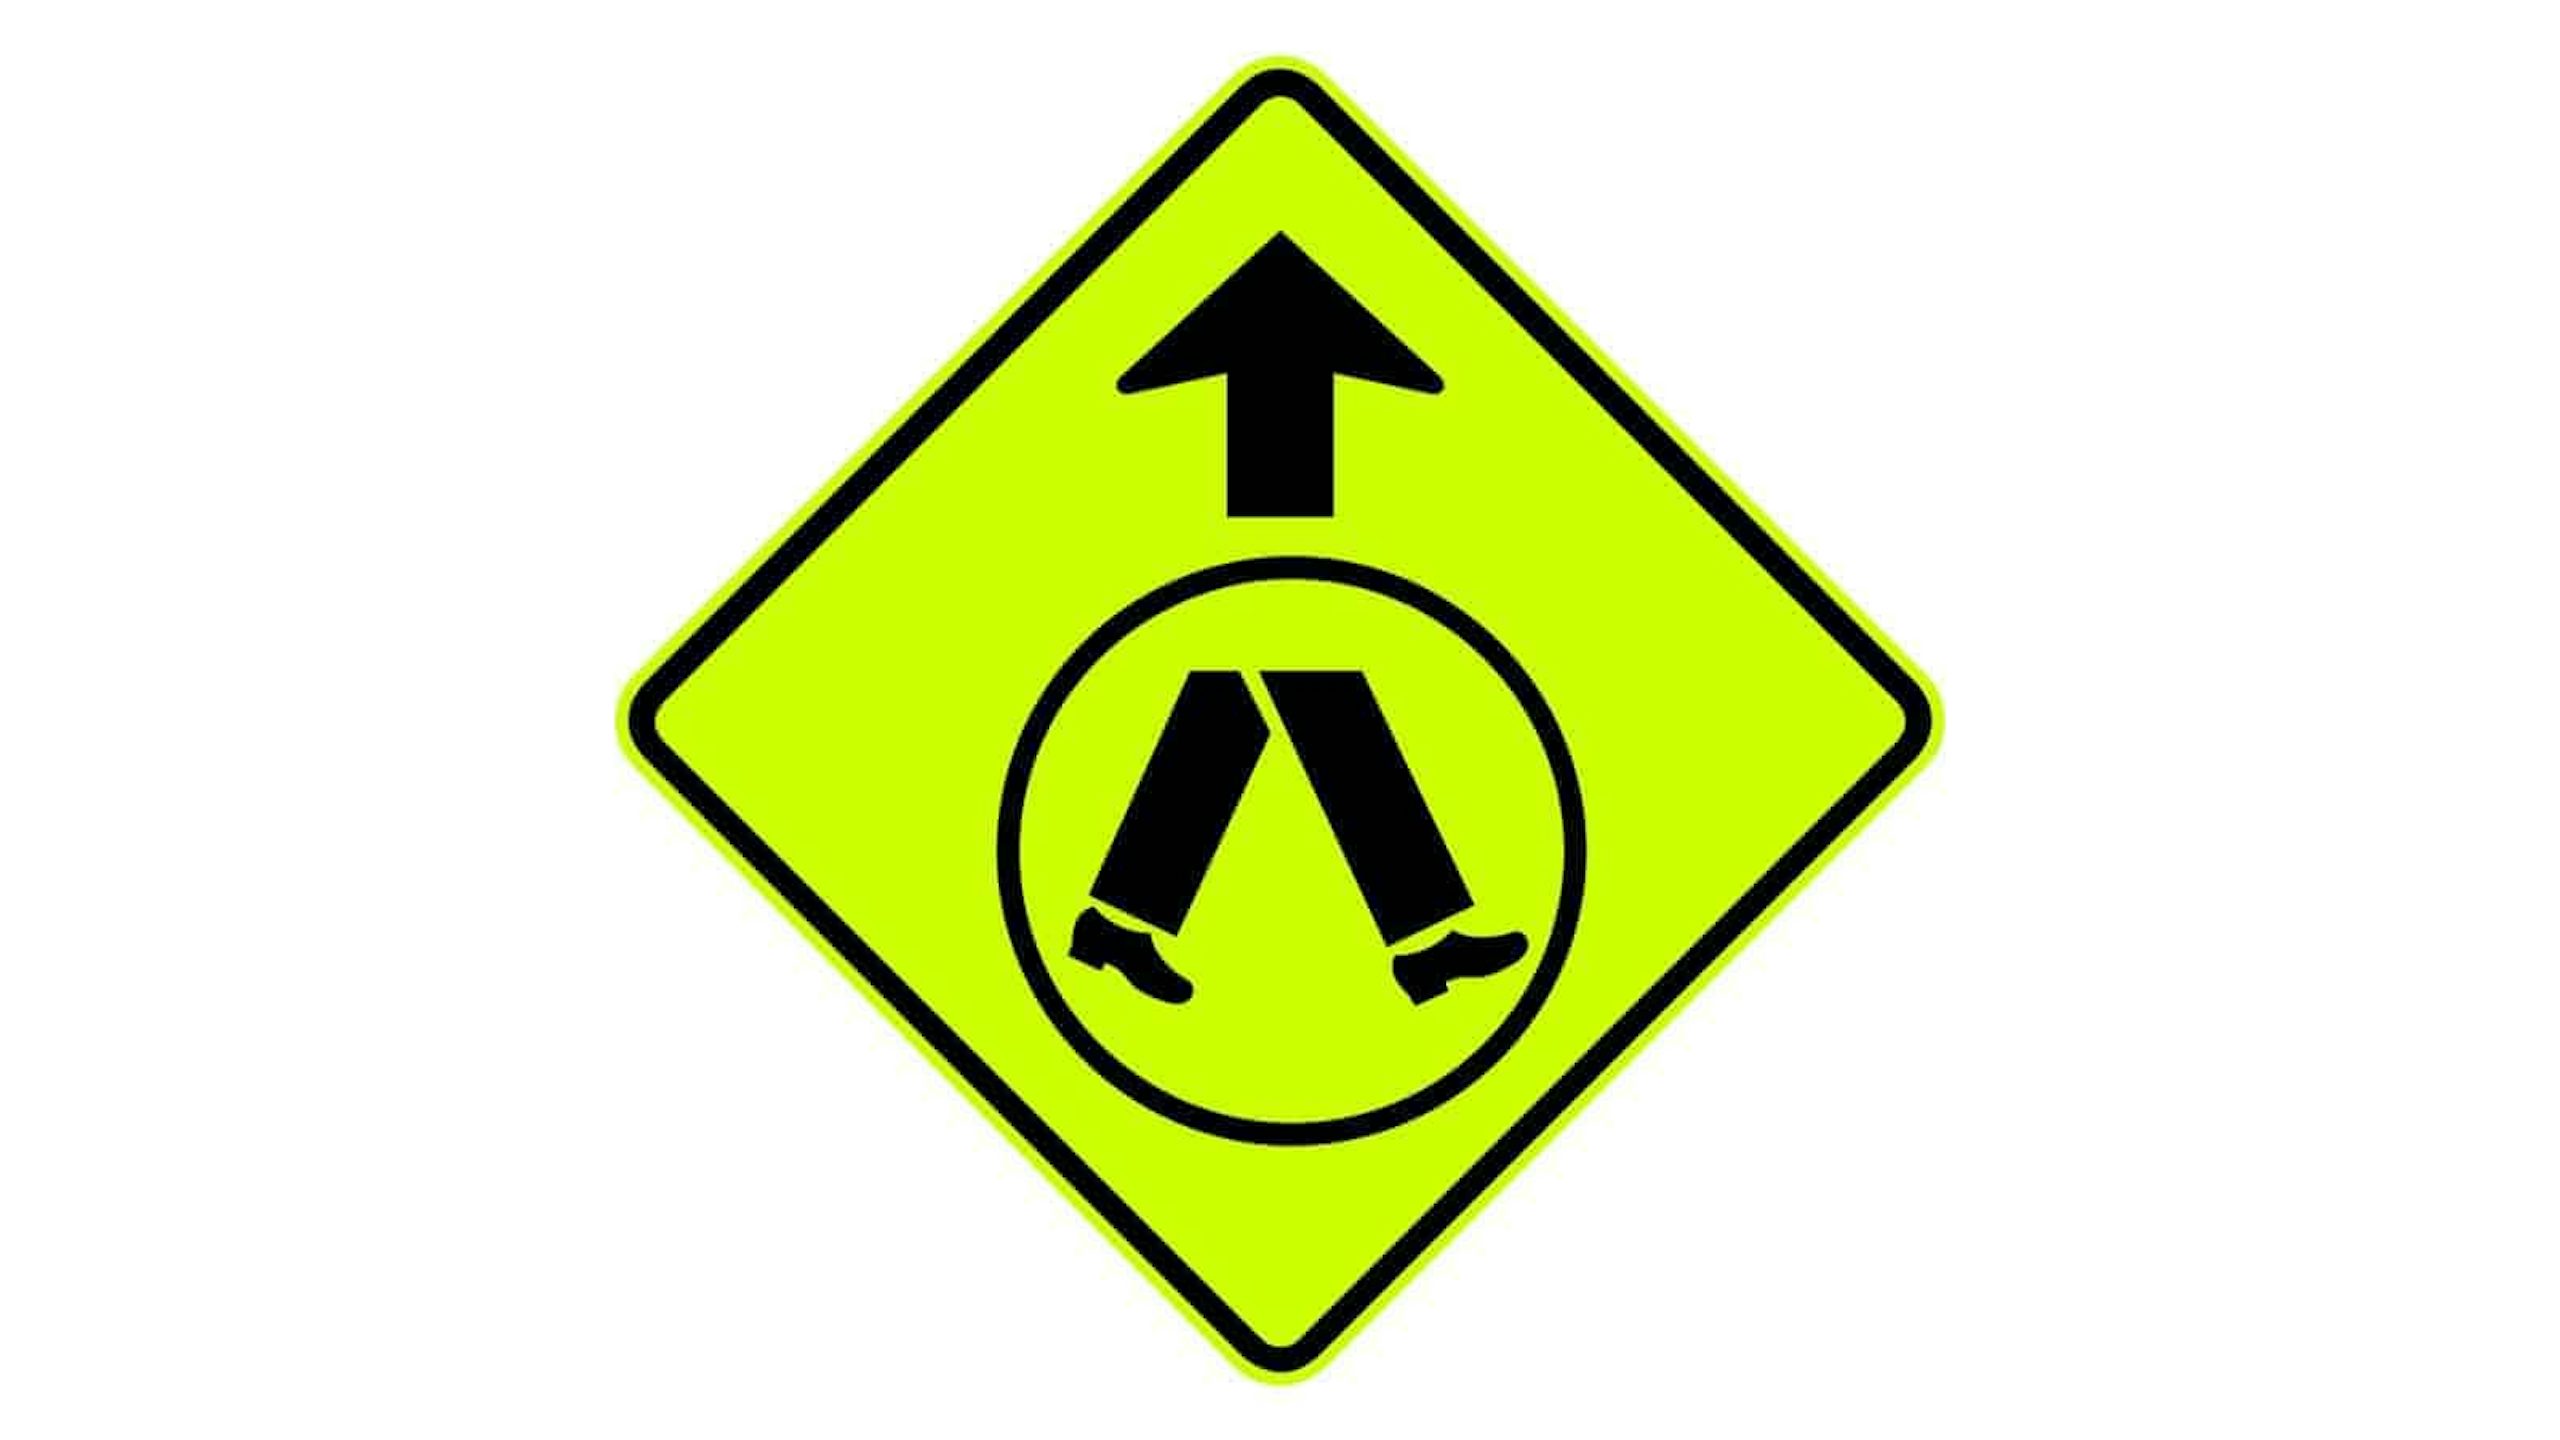 Pedestrian Crossing Sign: What Does it Mean?